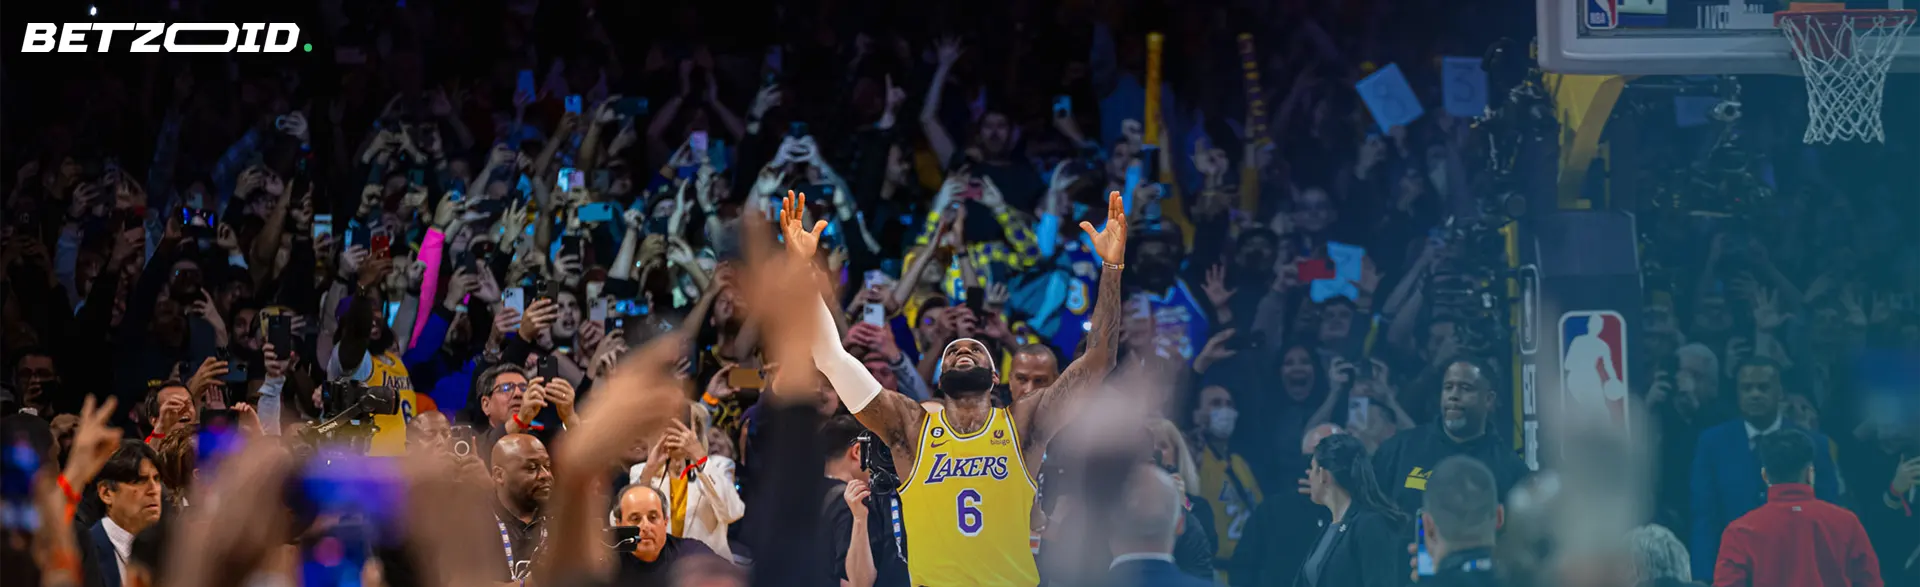 A basketball player celebrates amidst a cheering crowd, capturing the excitement of NBA betting websites.